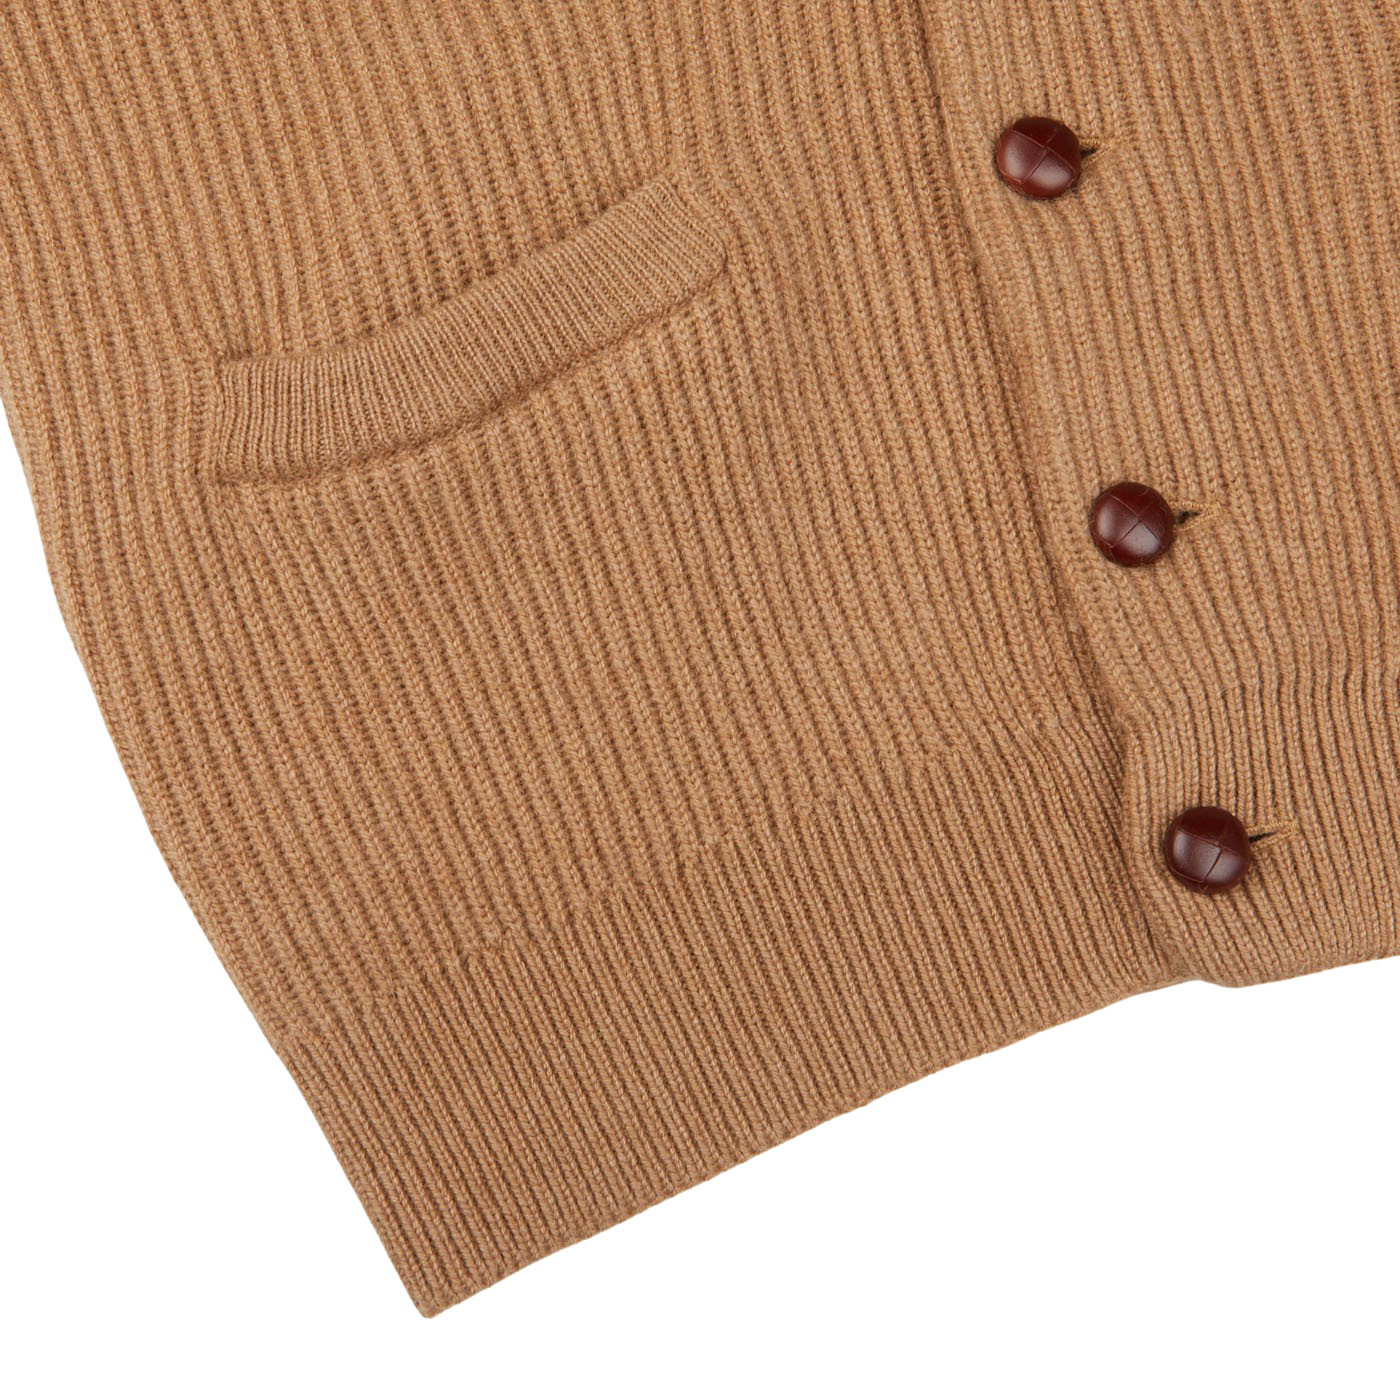 A William Lockie brown camel hair shawl collar cardigan with buttons on the front and a shawl collar.